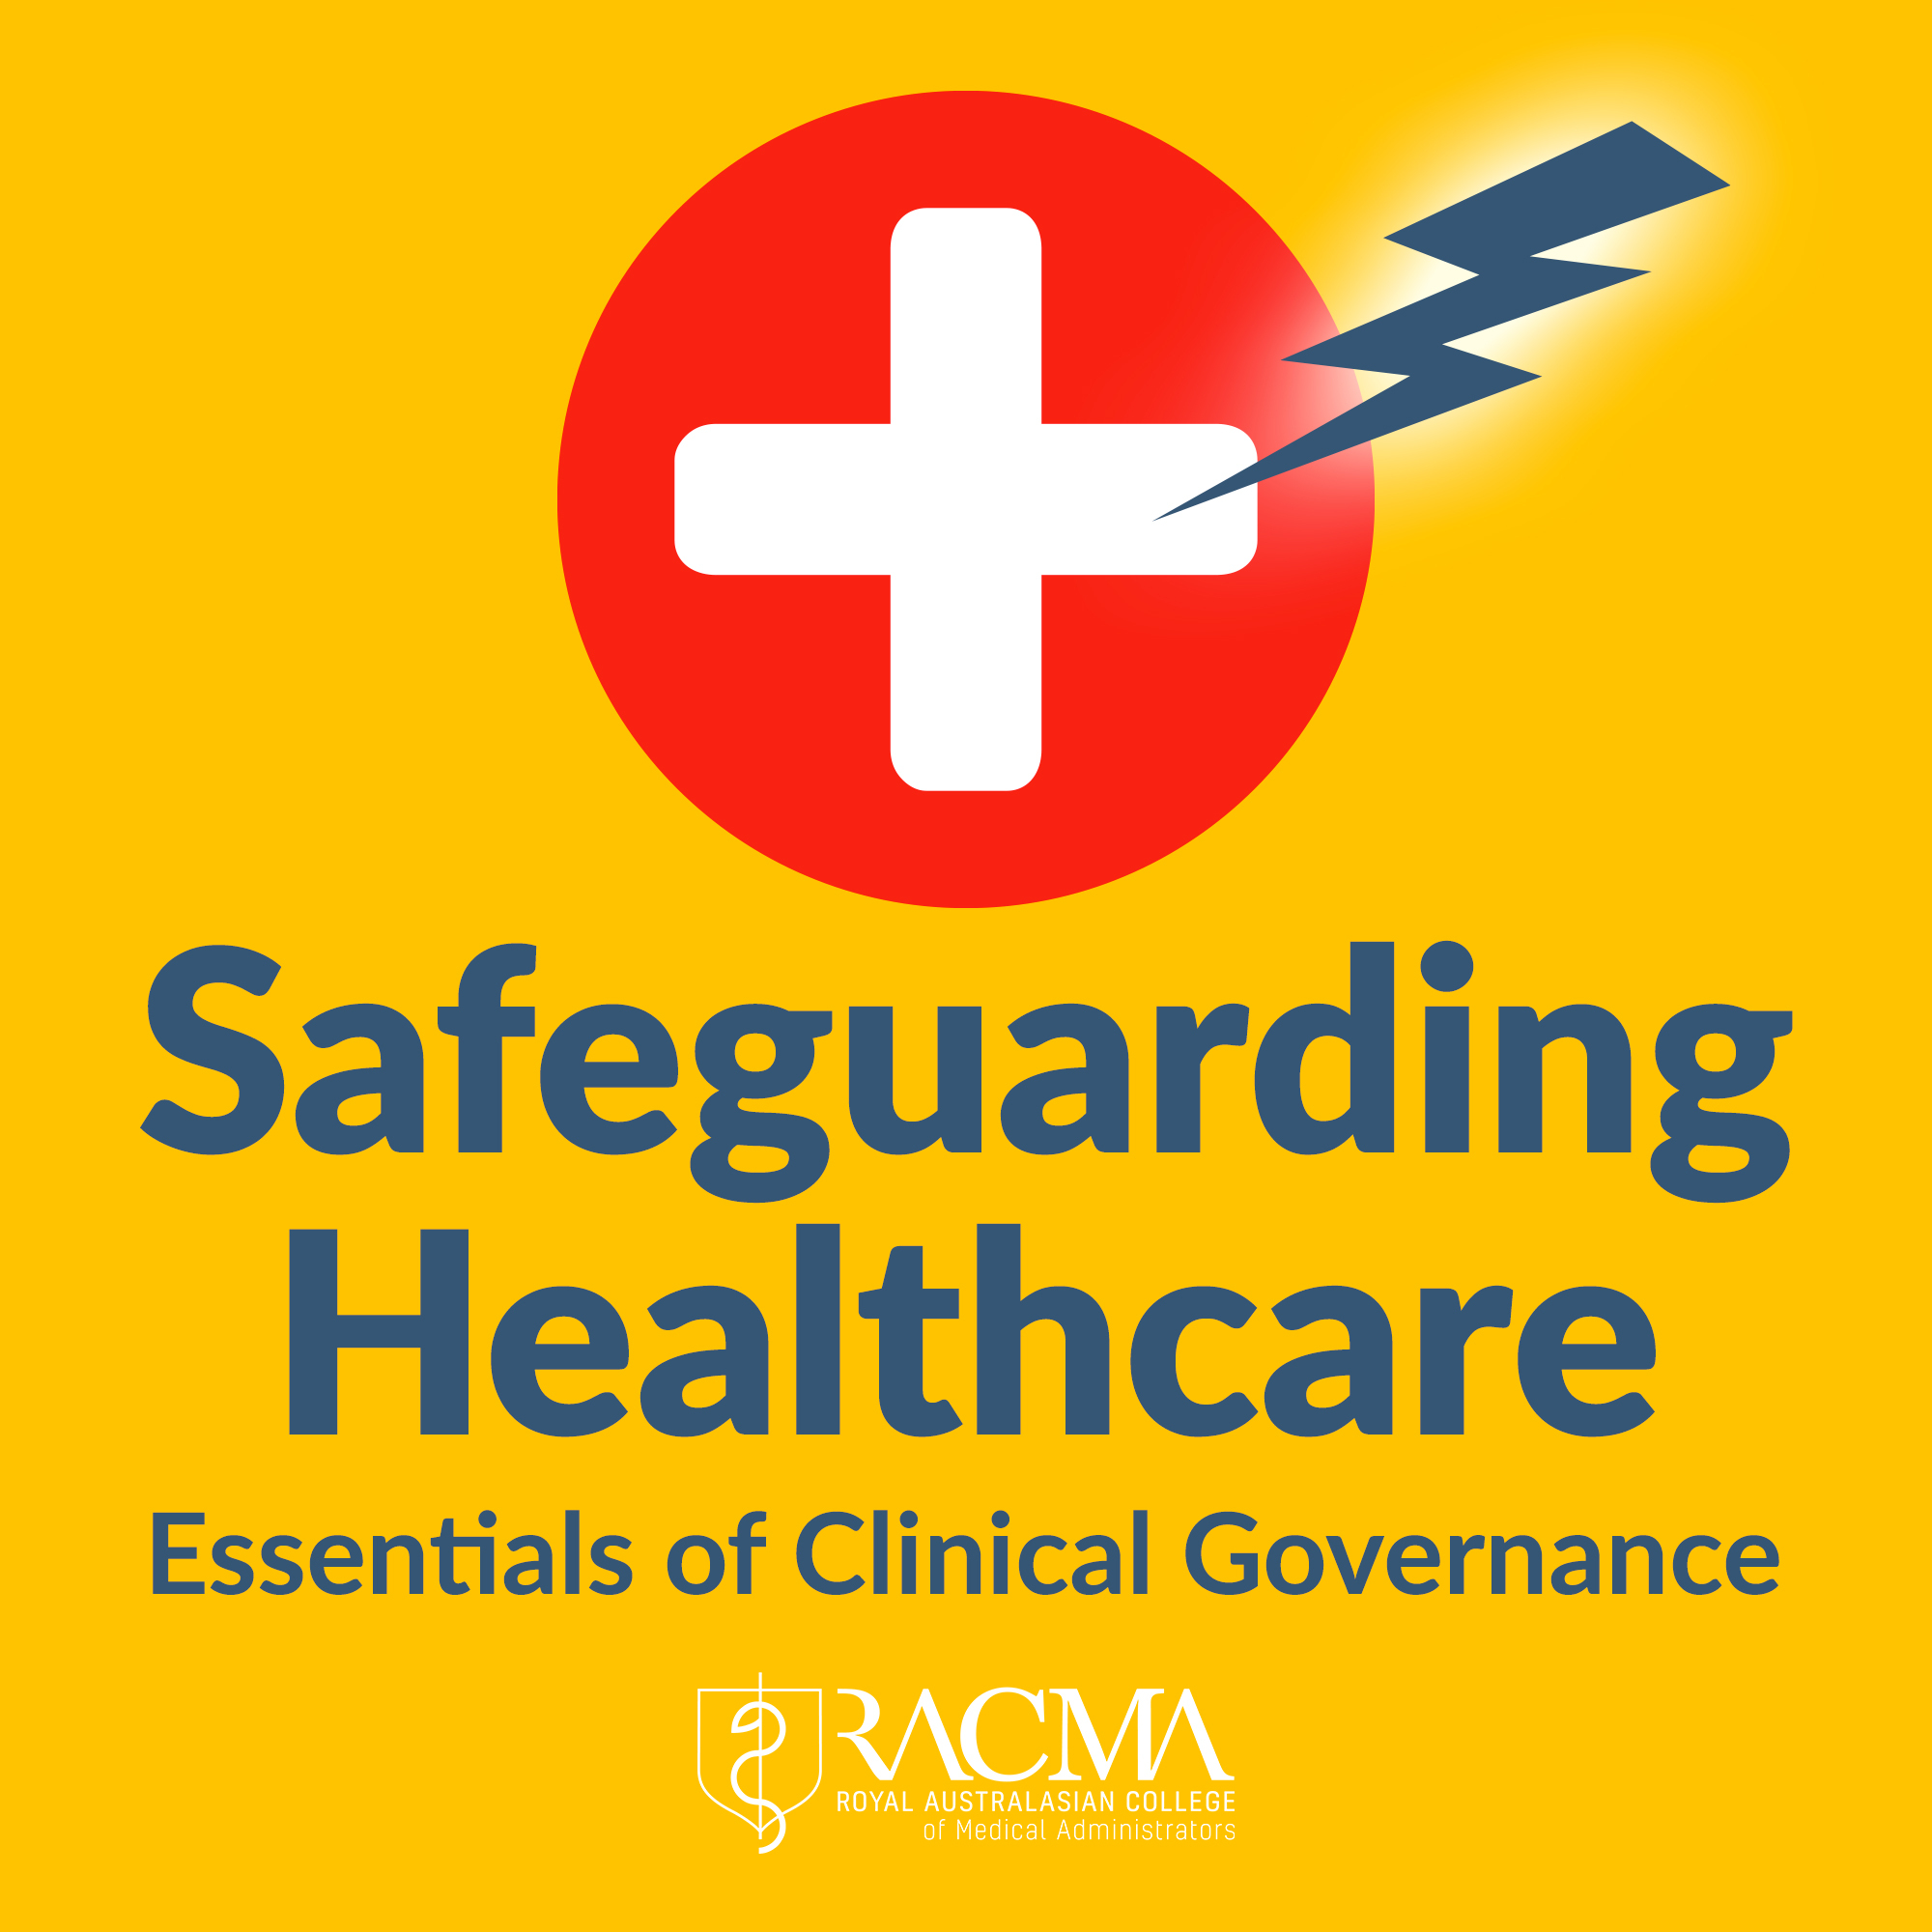 Introducing: Safeguarding Healthcare - the essentials of clinical governance